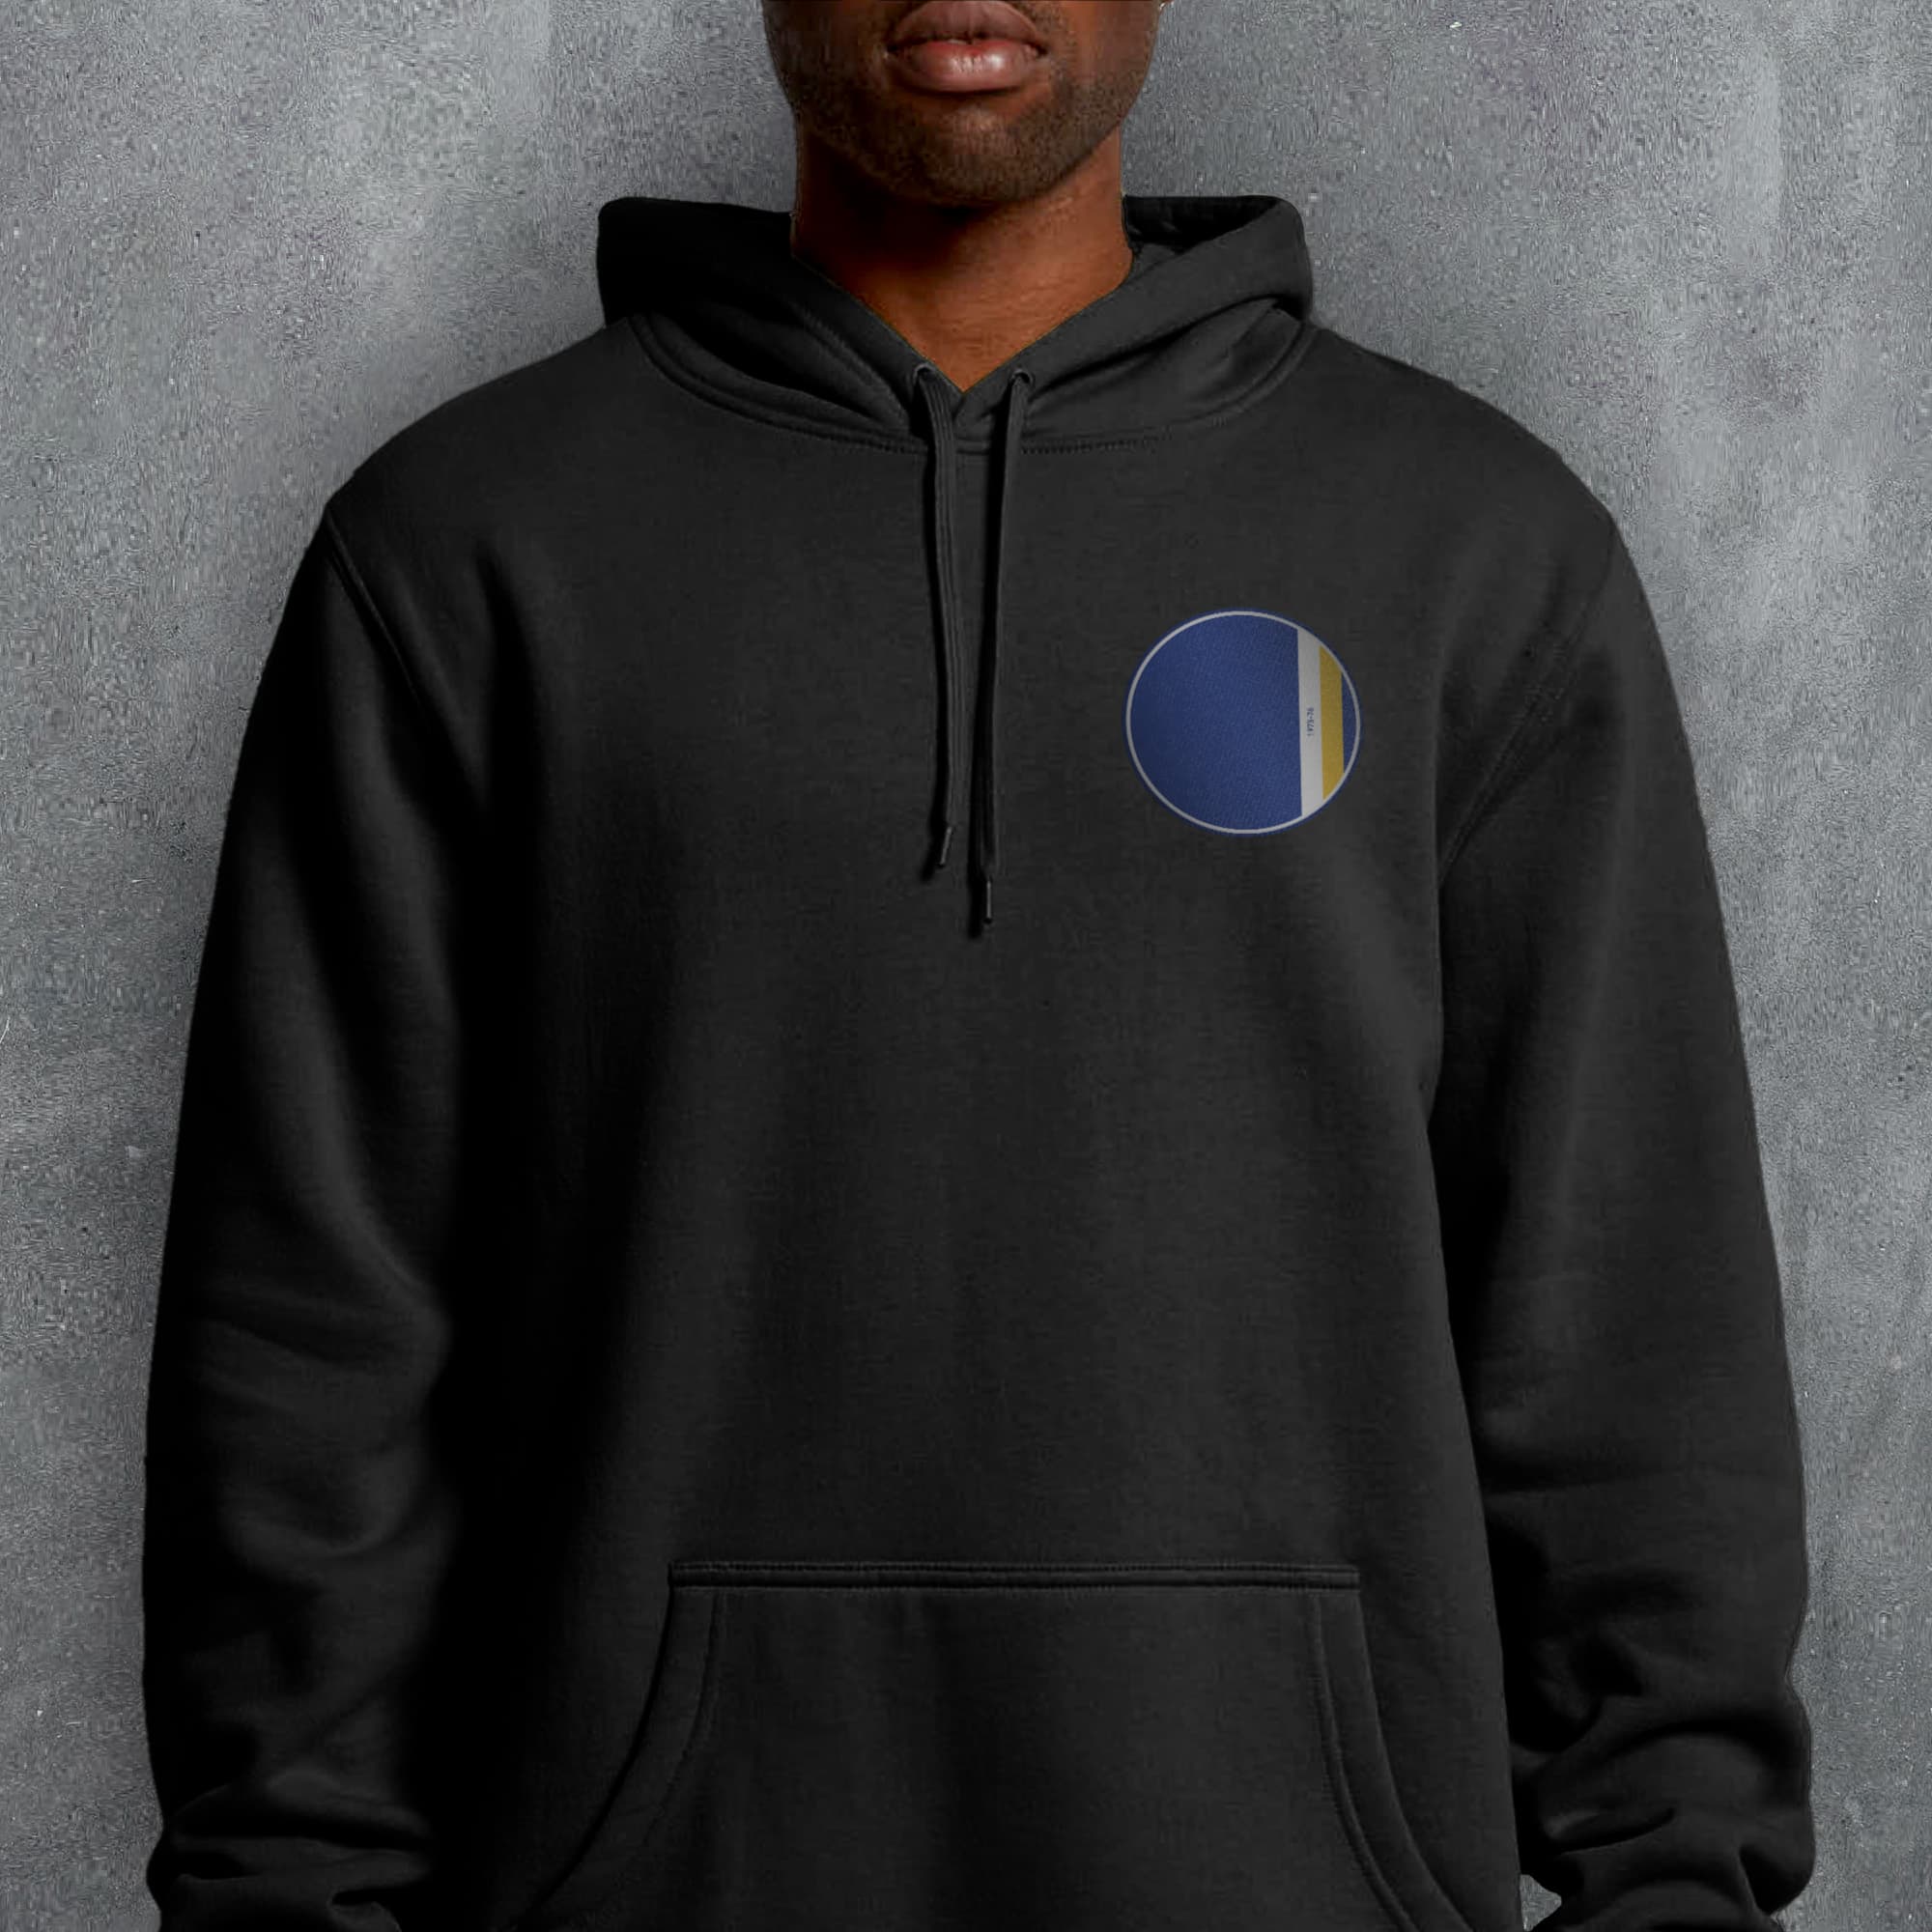 a man wearing a black hoodie with a blue and yellow circle on it